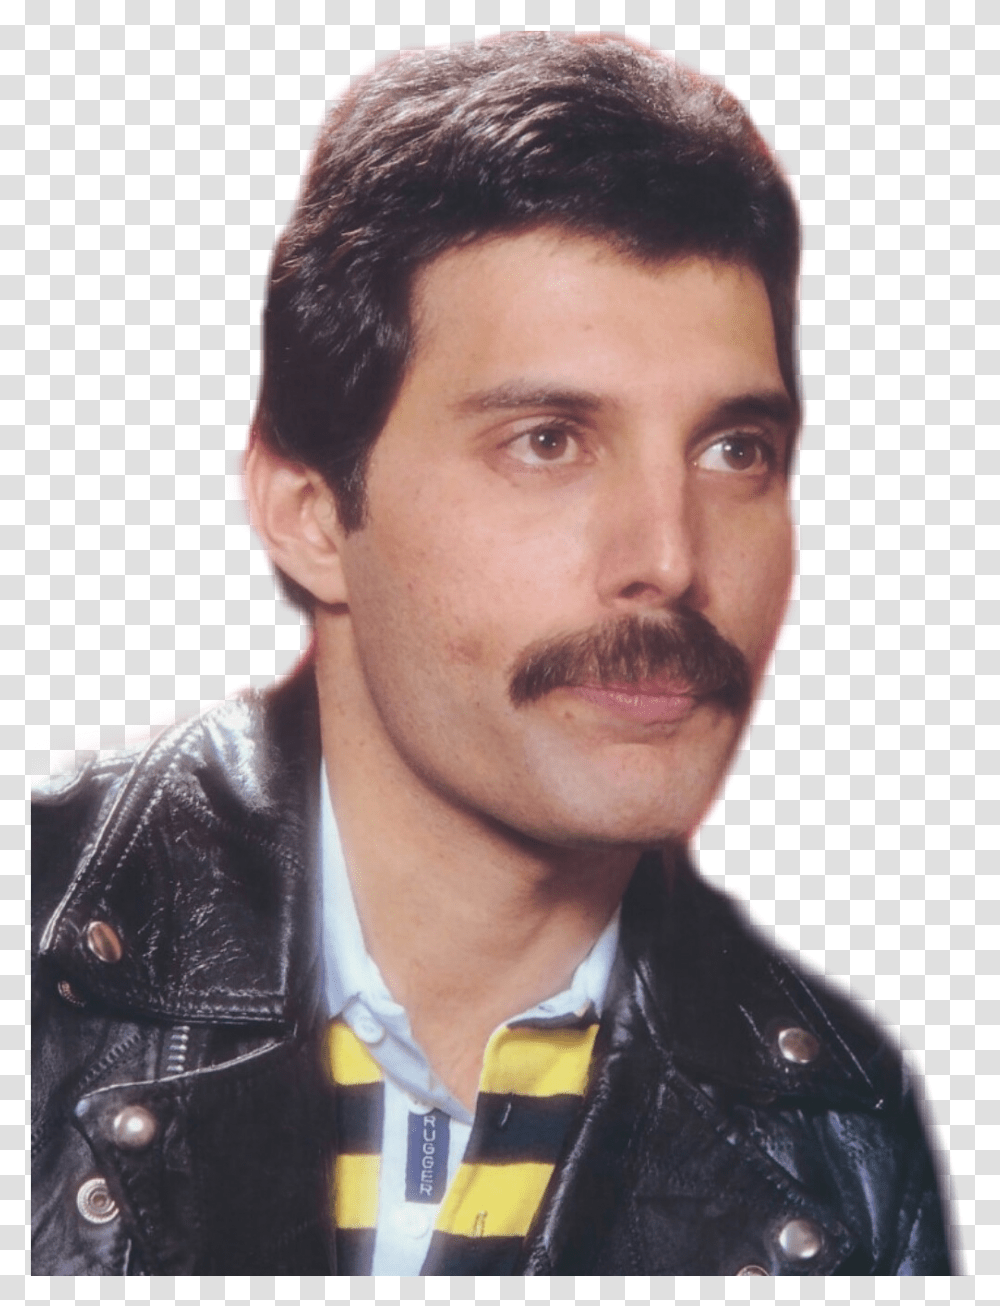 Freddiemercury png images for free download – Pngset.com